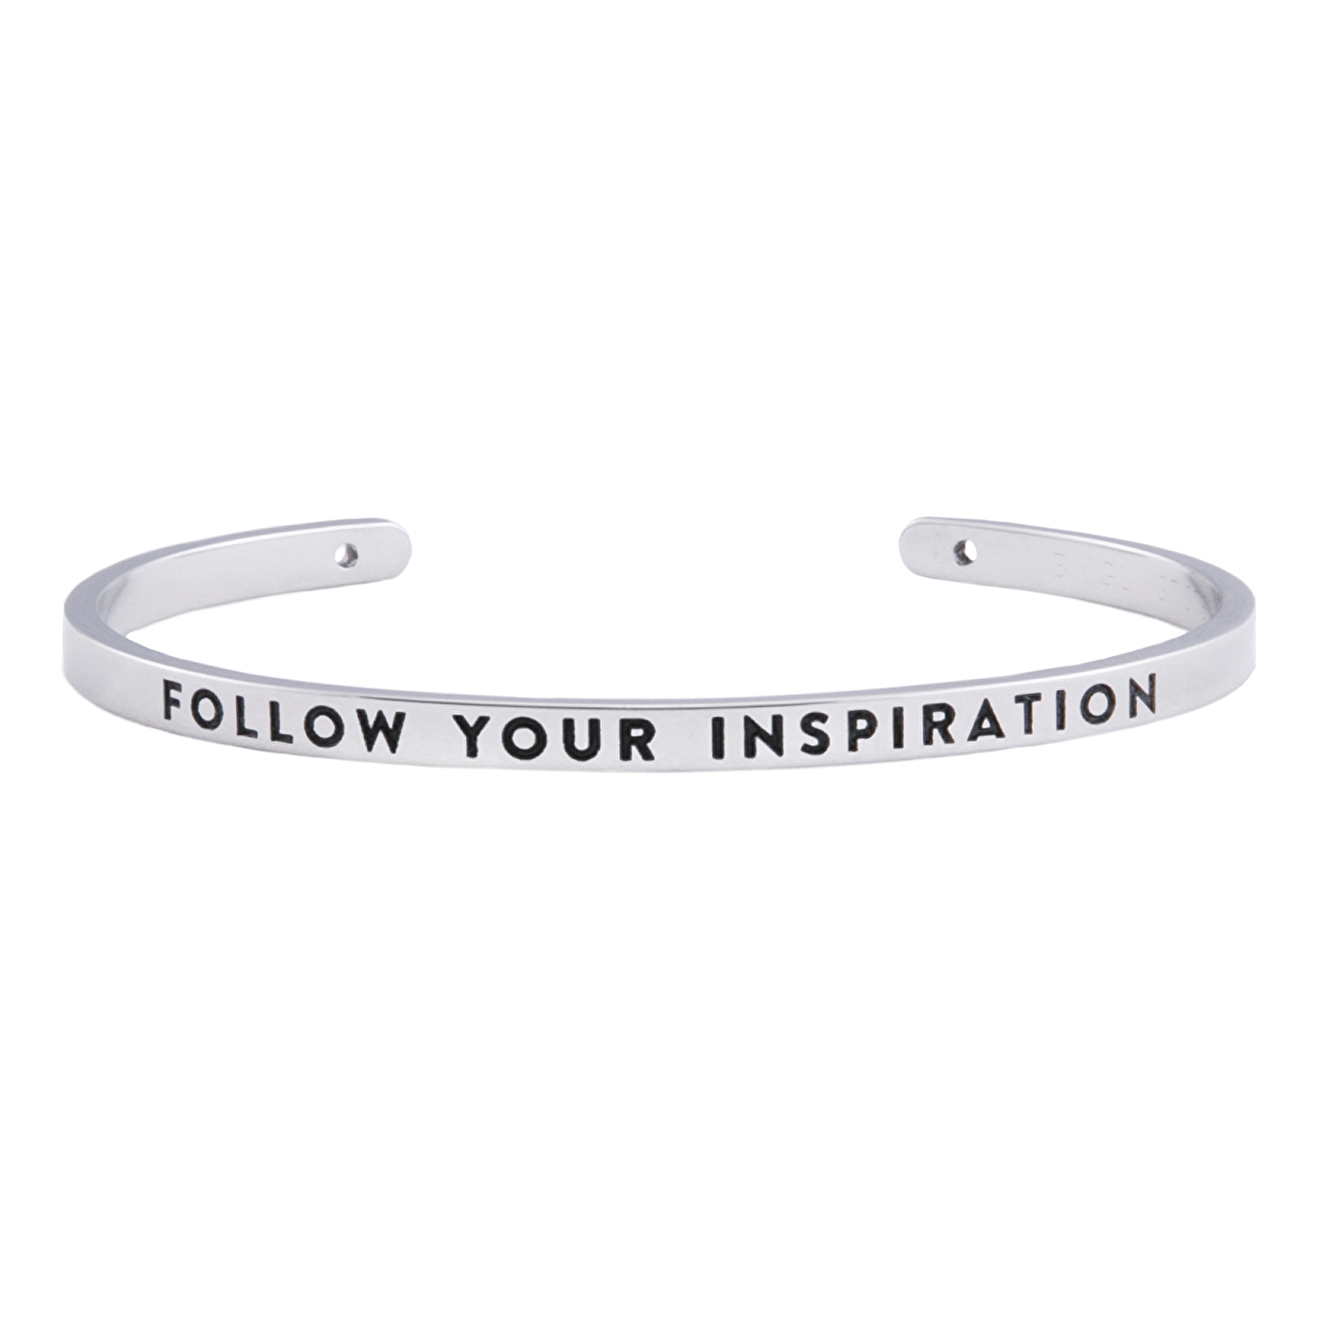 BNGL браслет FOLLOW YOUR INSPIRATION bngl браслет believe